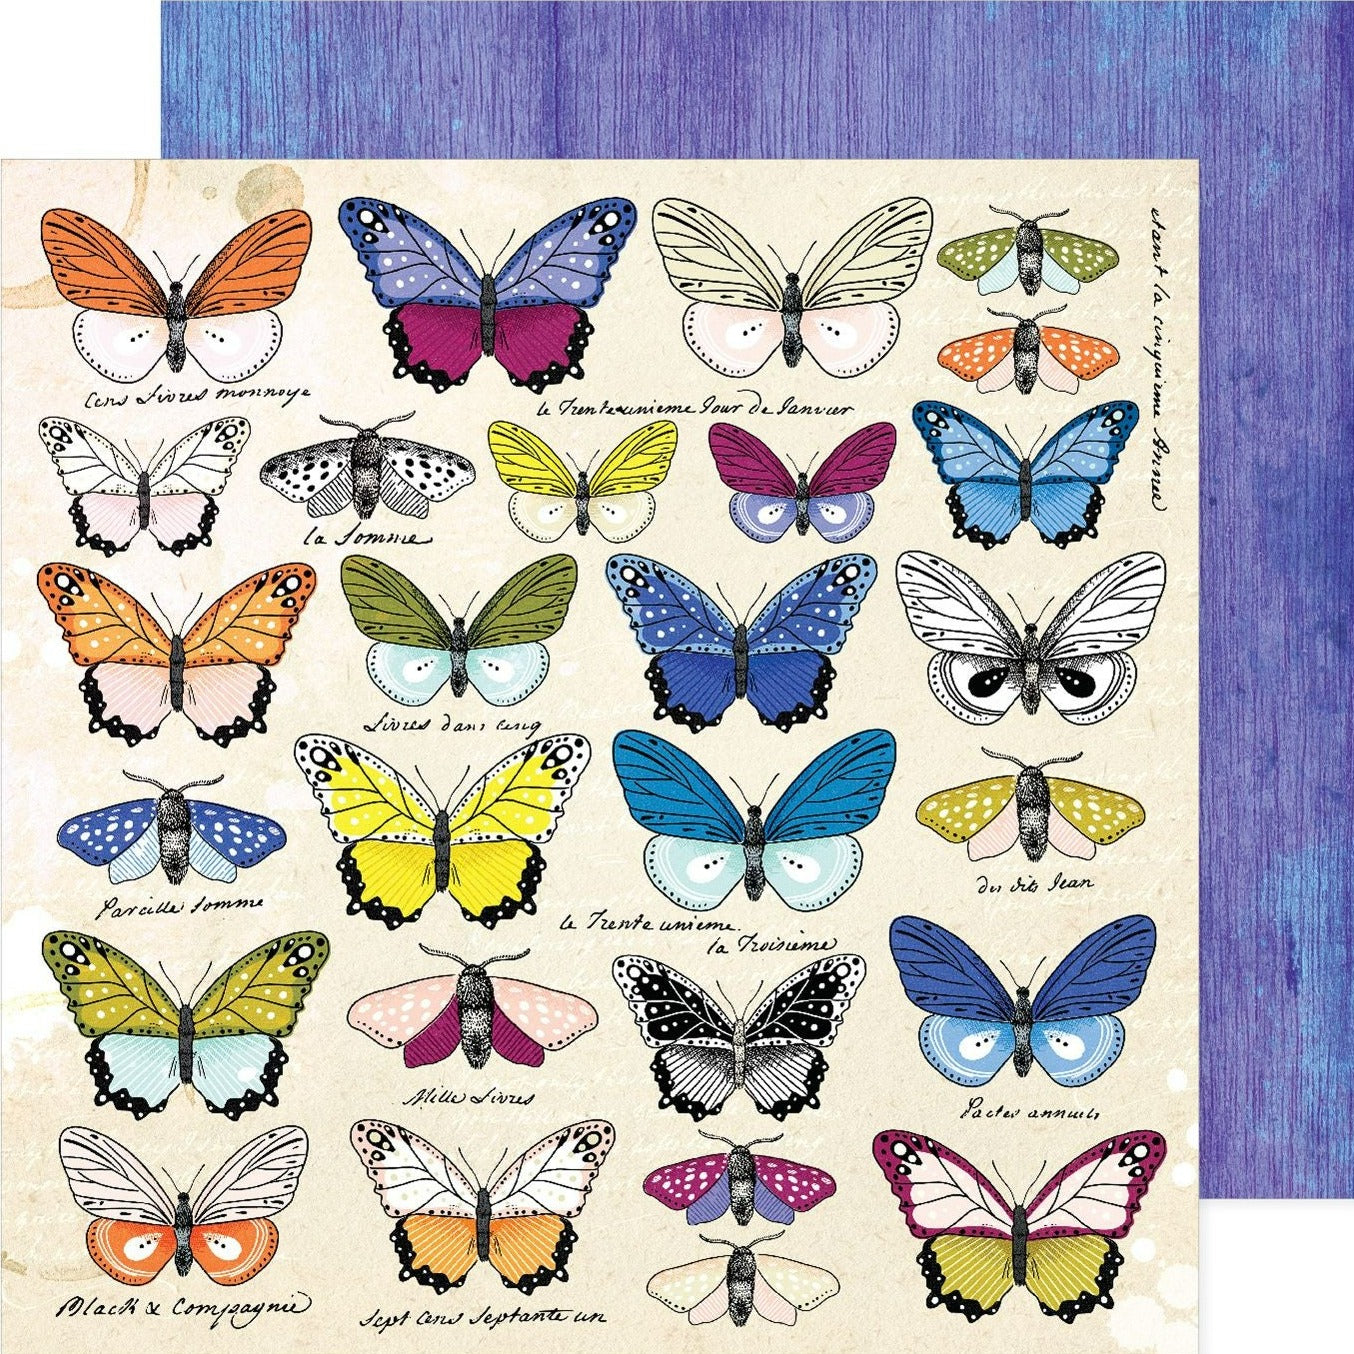 12x12 patterned cardstock. (Side A - beautiful butterflies in multiple colors on a cream background; Side B - blue distressed background) - Archival-safe and acid-free from American Crafts